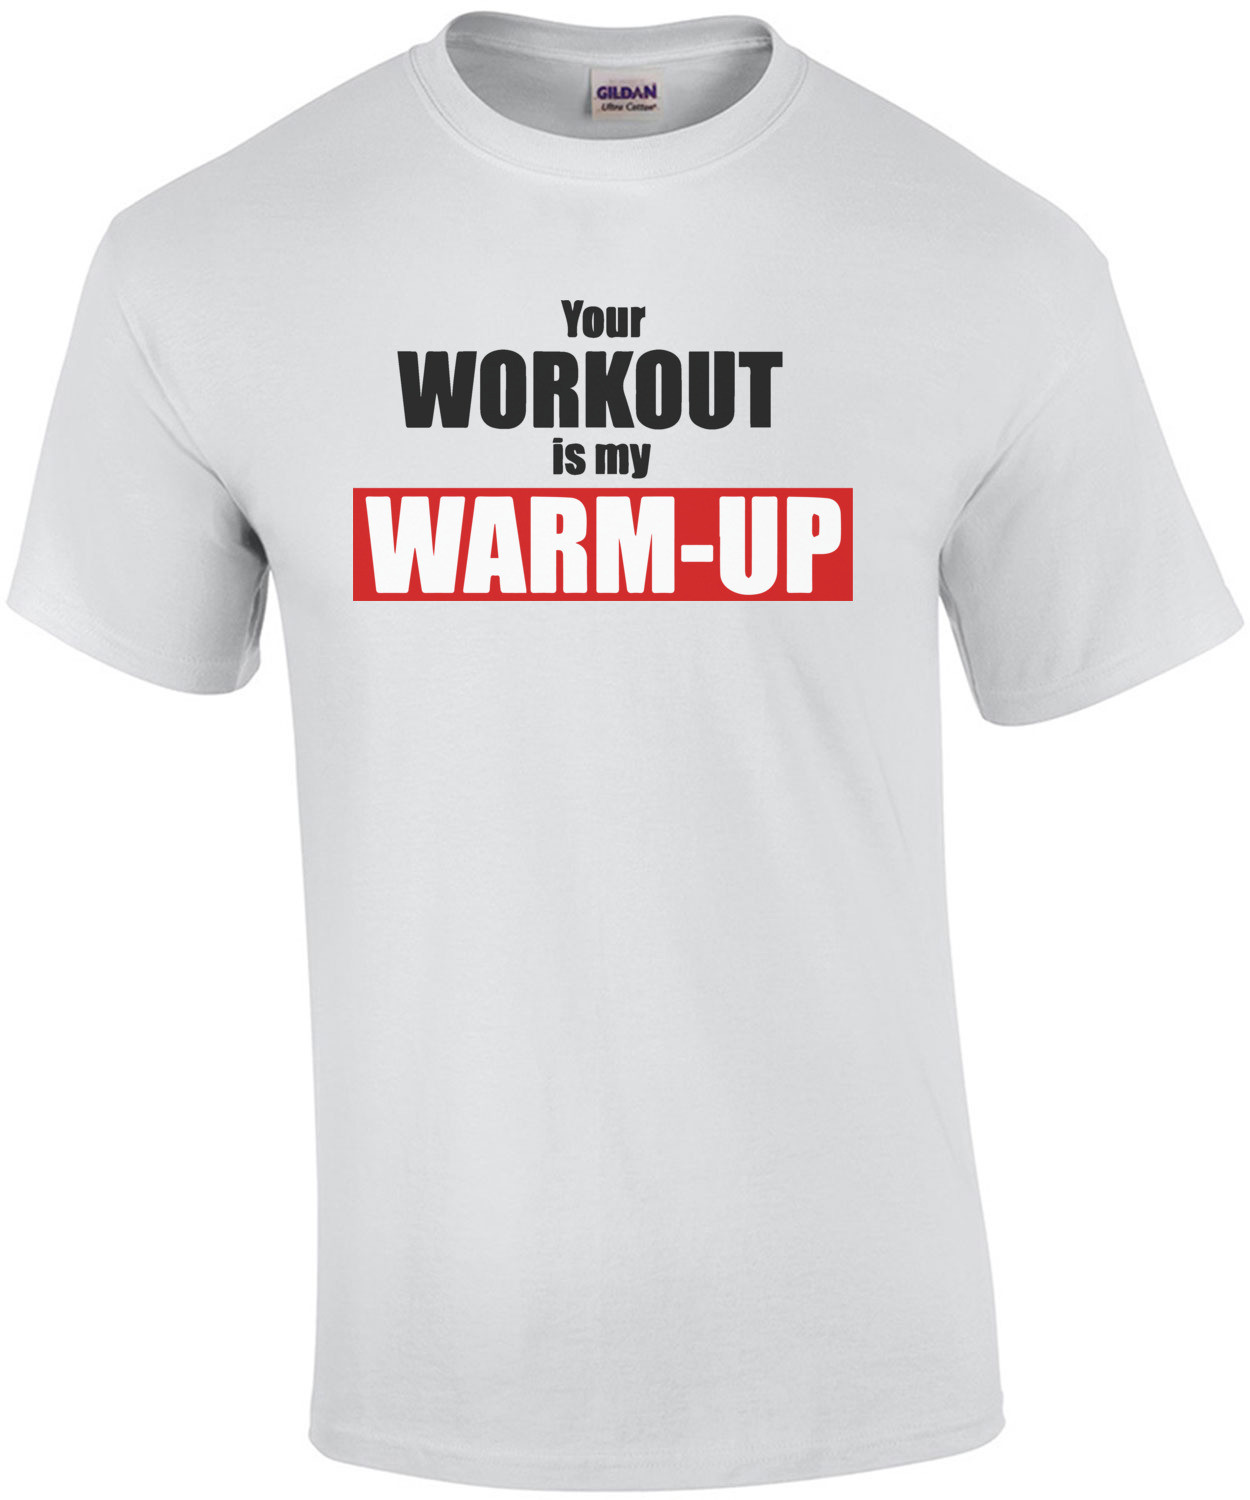 Your Workout is my warm-up Funny Exercise T-Shirt